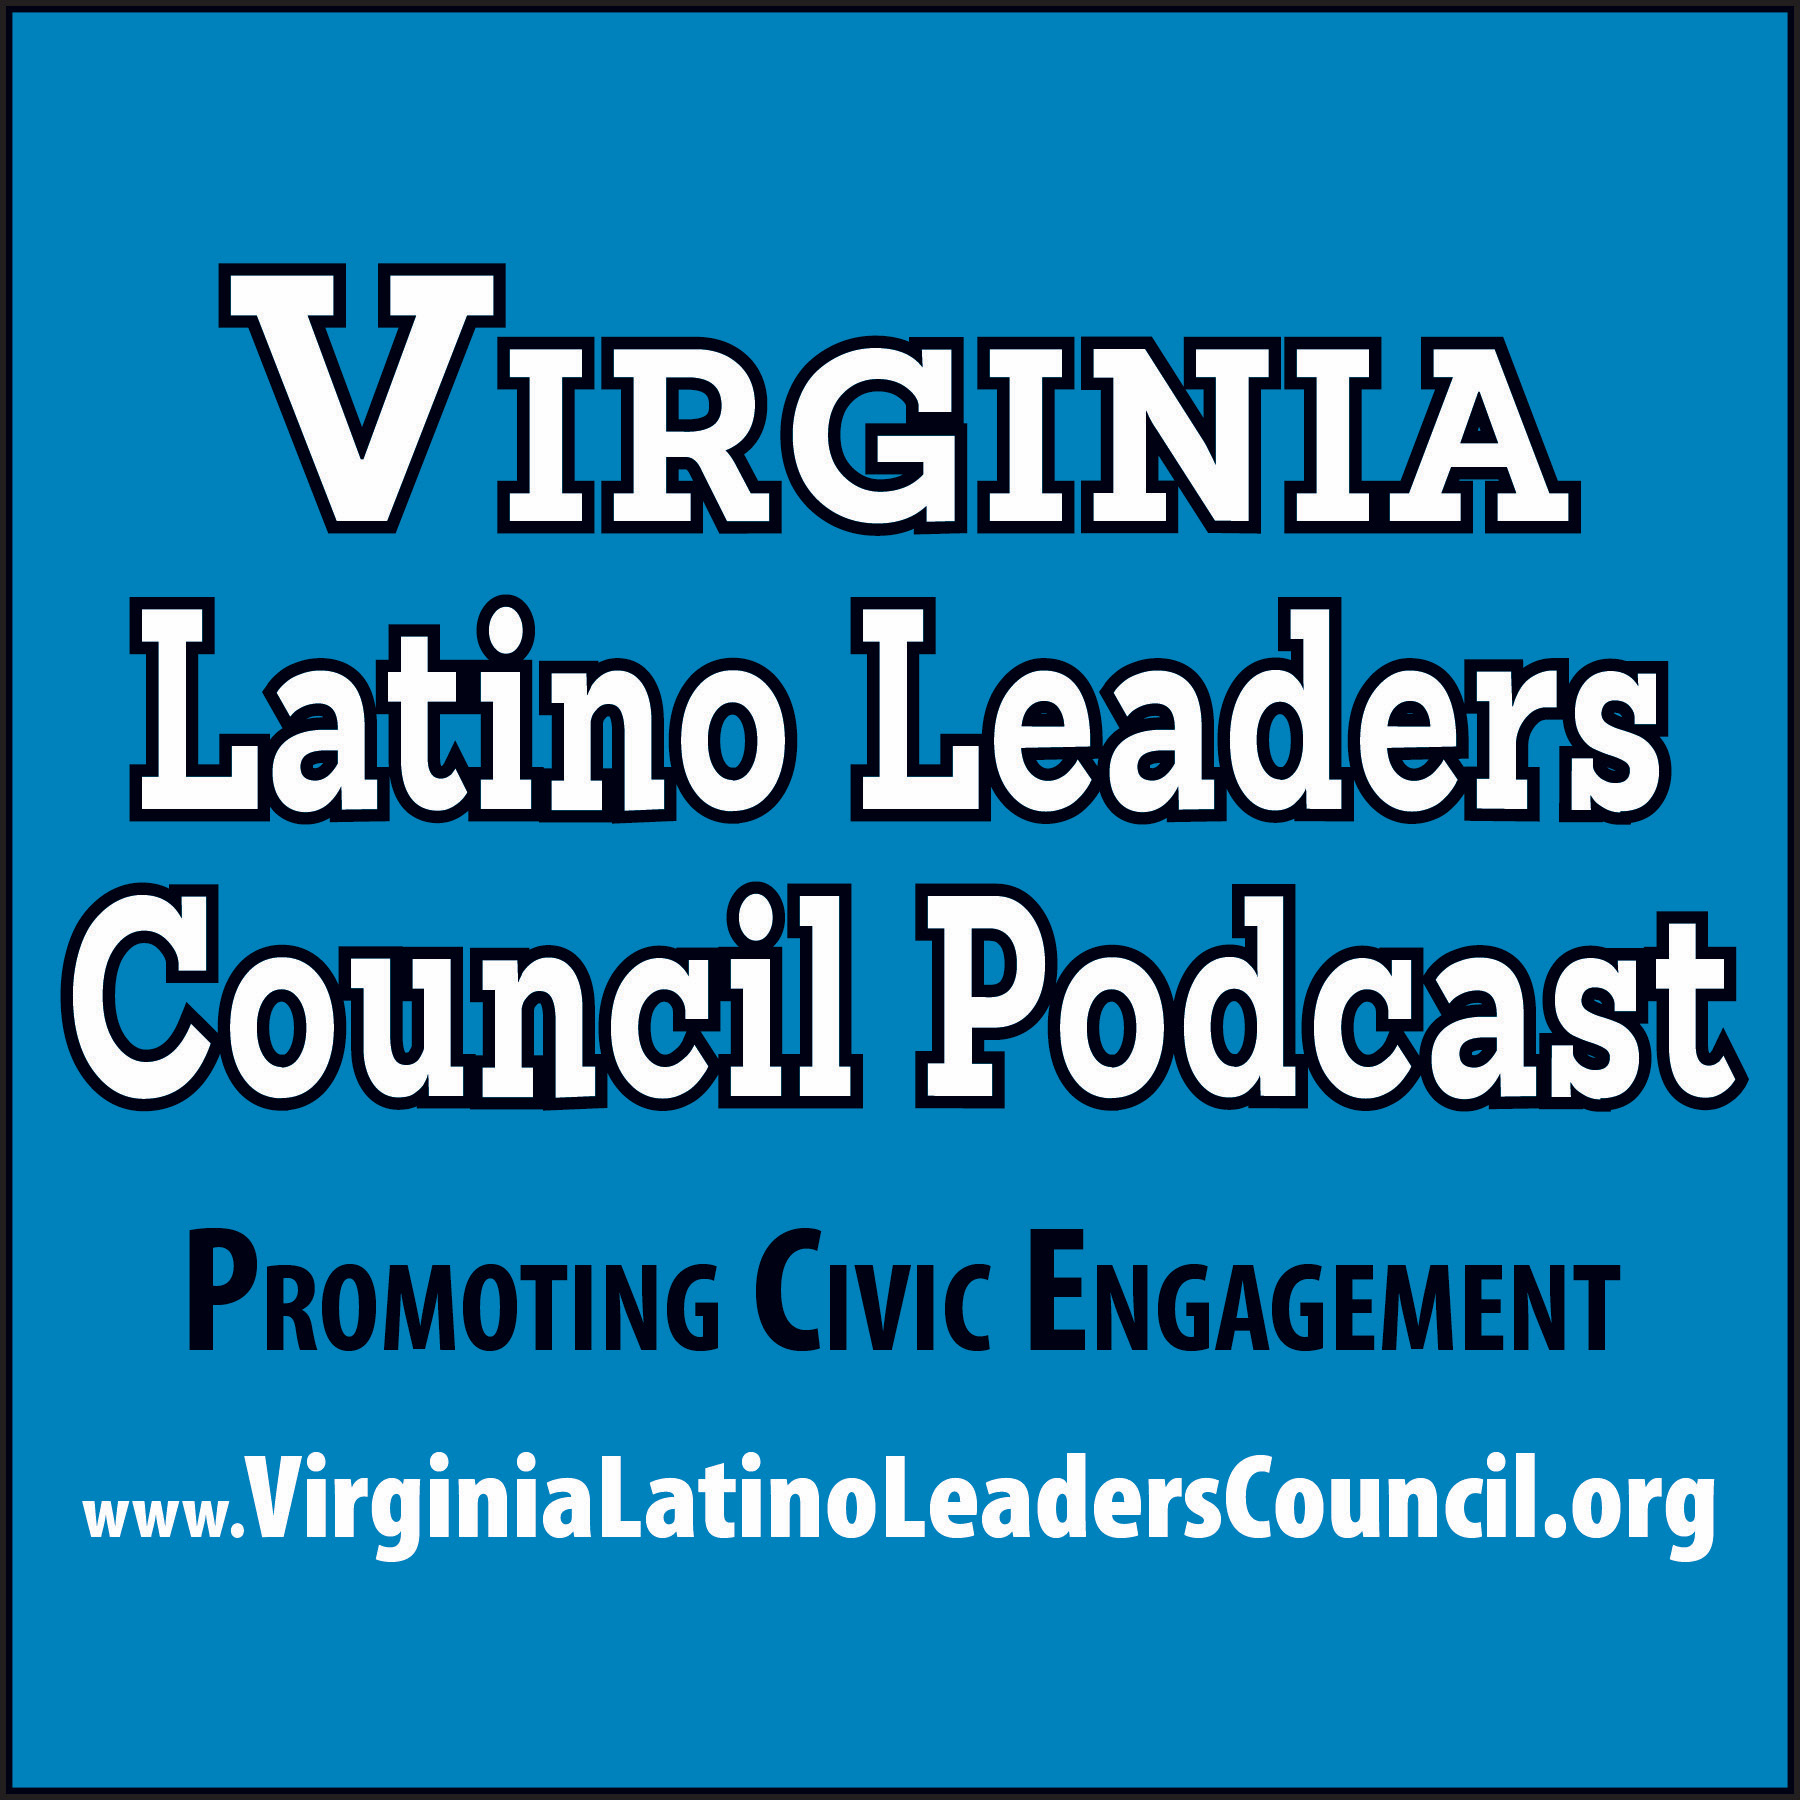 Virginia Latino Leaders Council Podcast